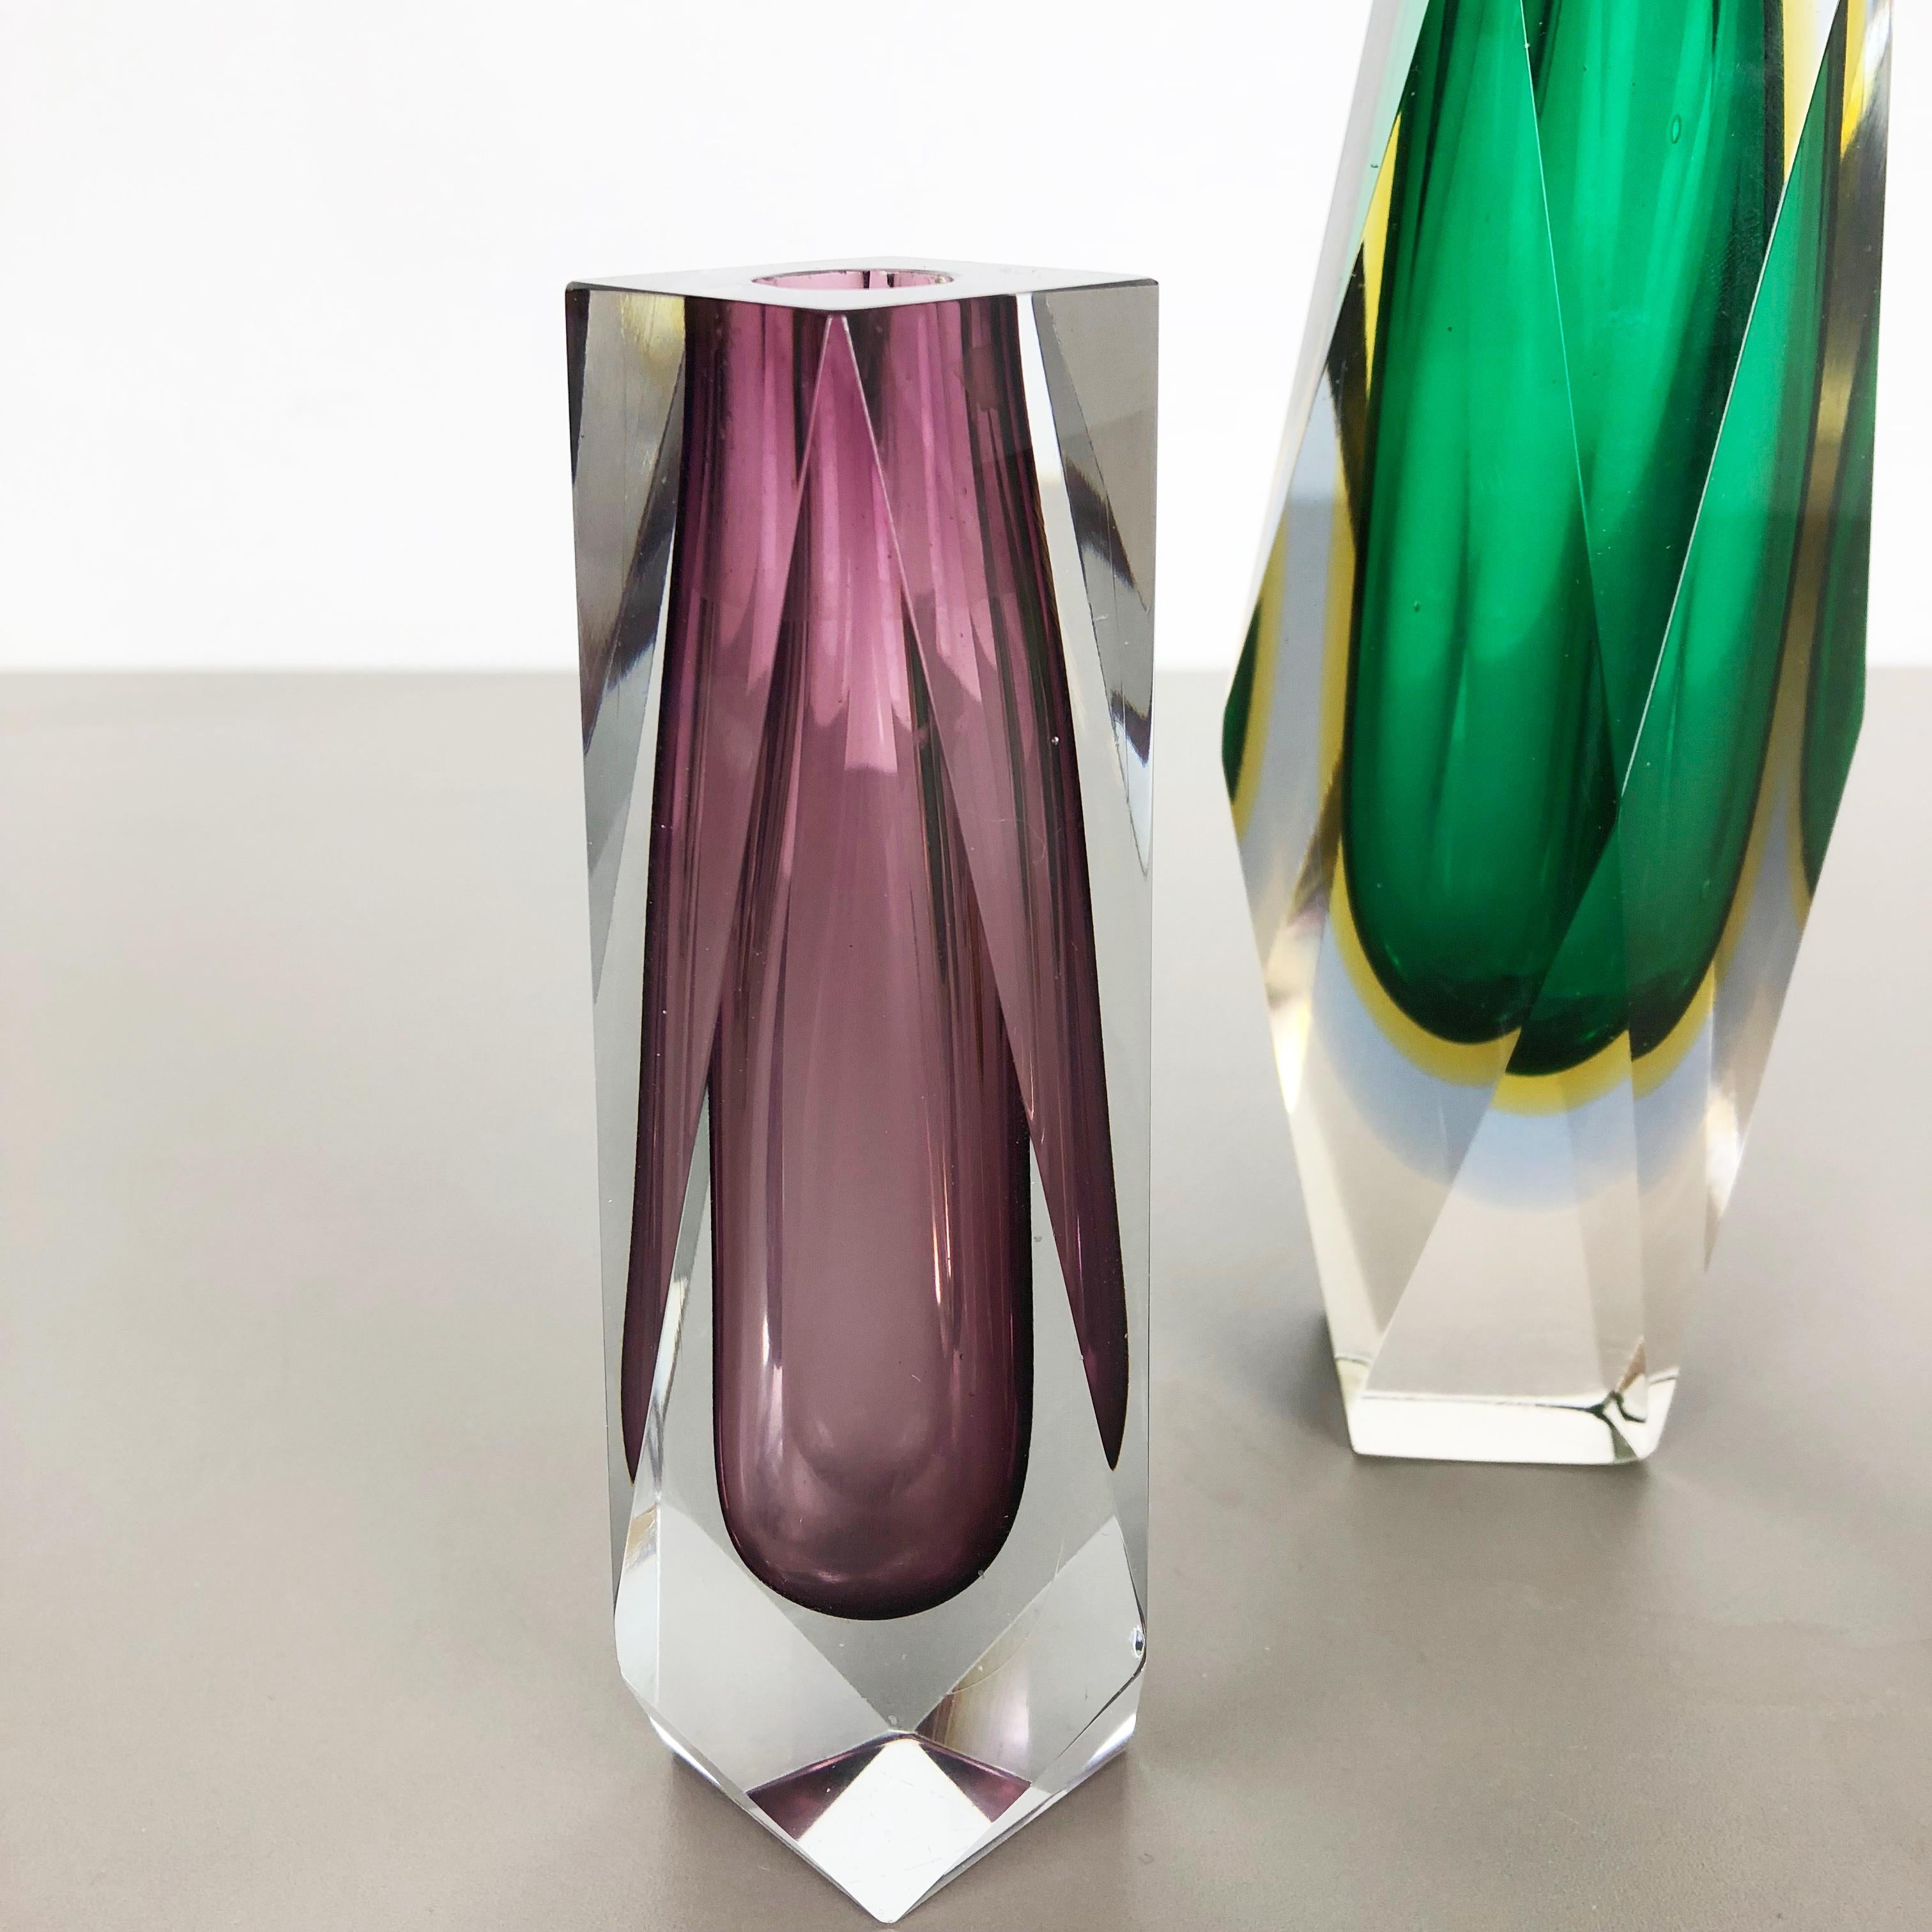 Rare Set of 3 Faceted Murano Glass Sommerso Vases, Italy, 1970s 5